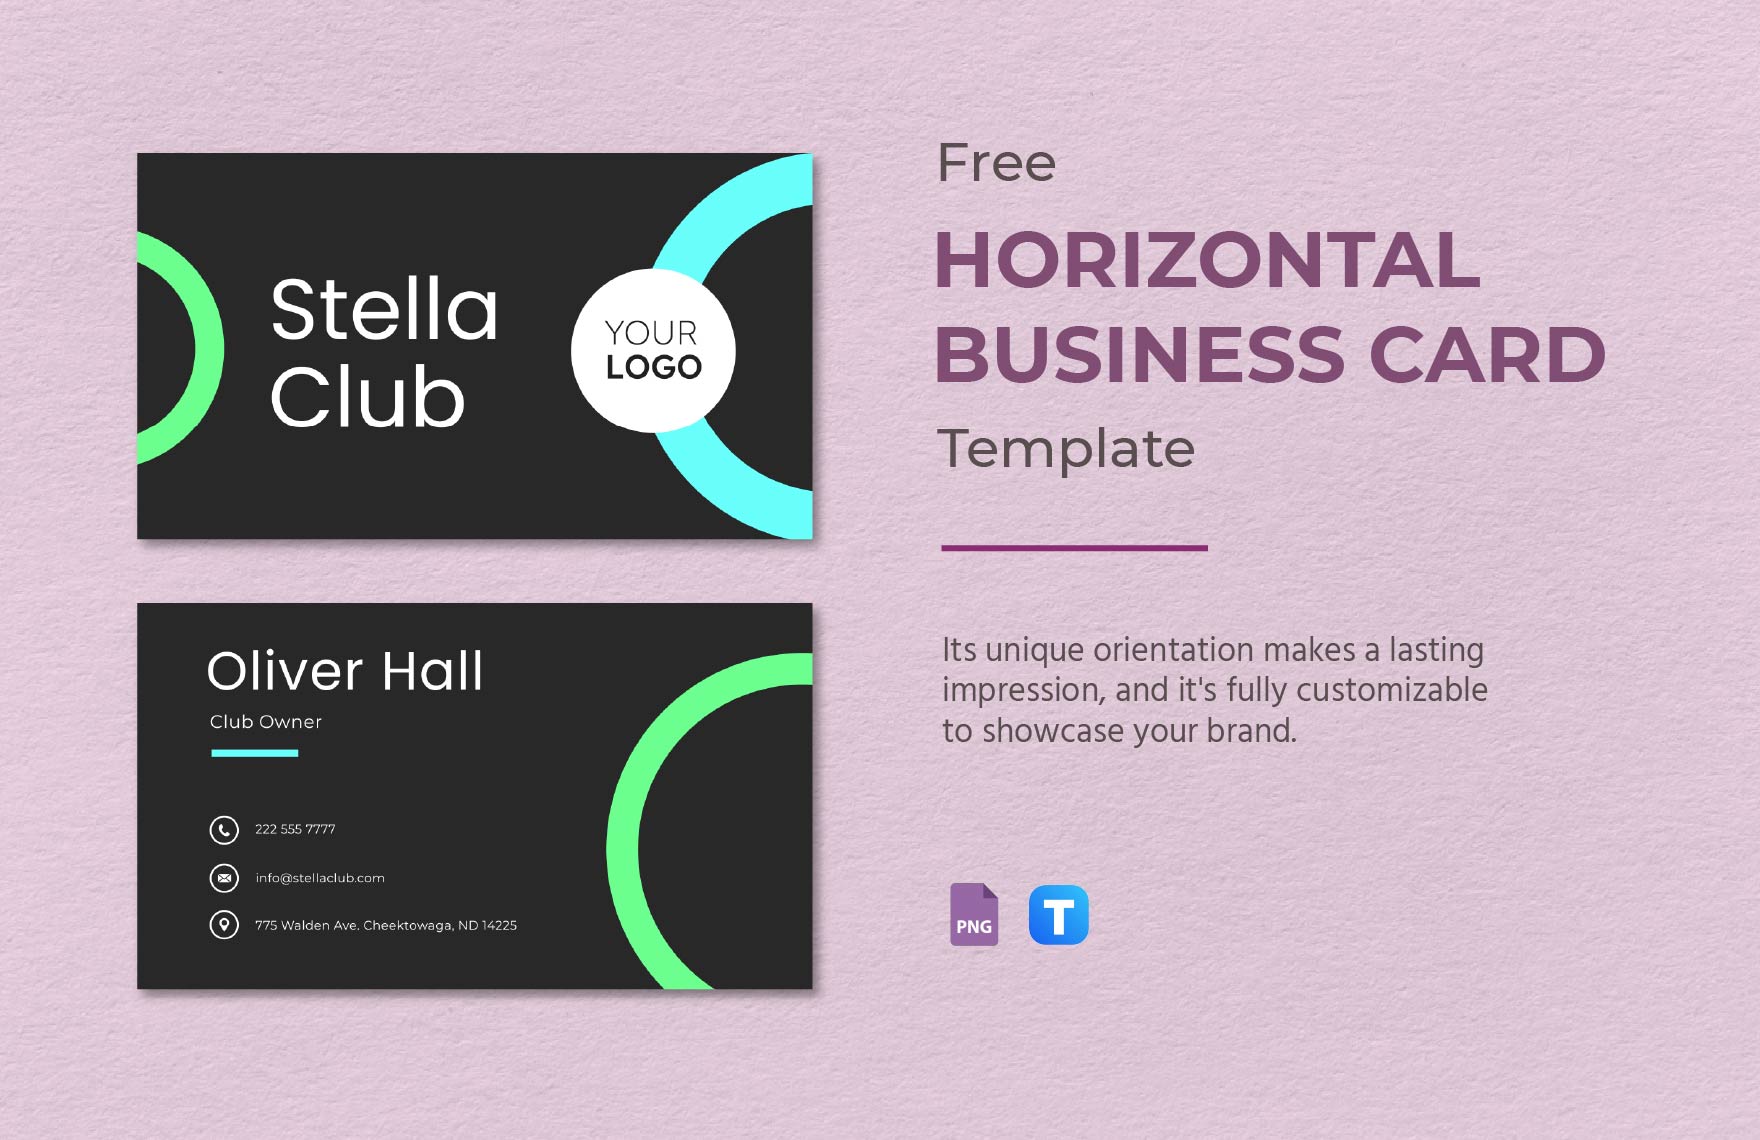 Horizontal Business Card Template in PNG